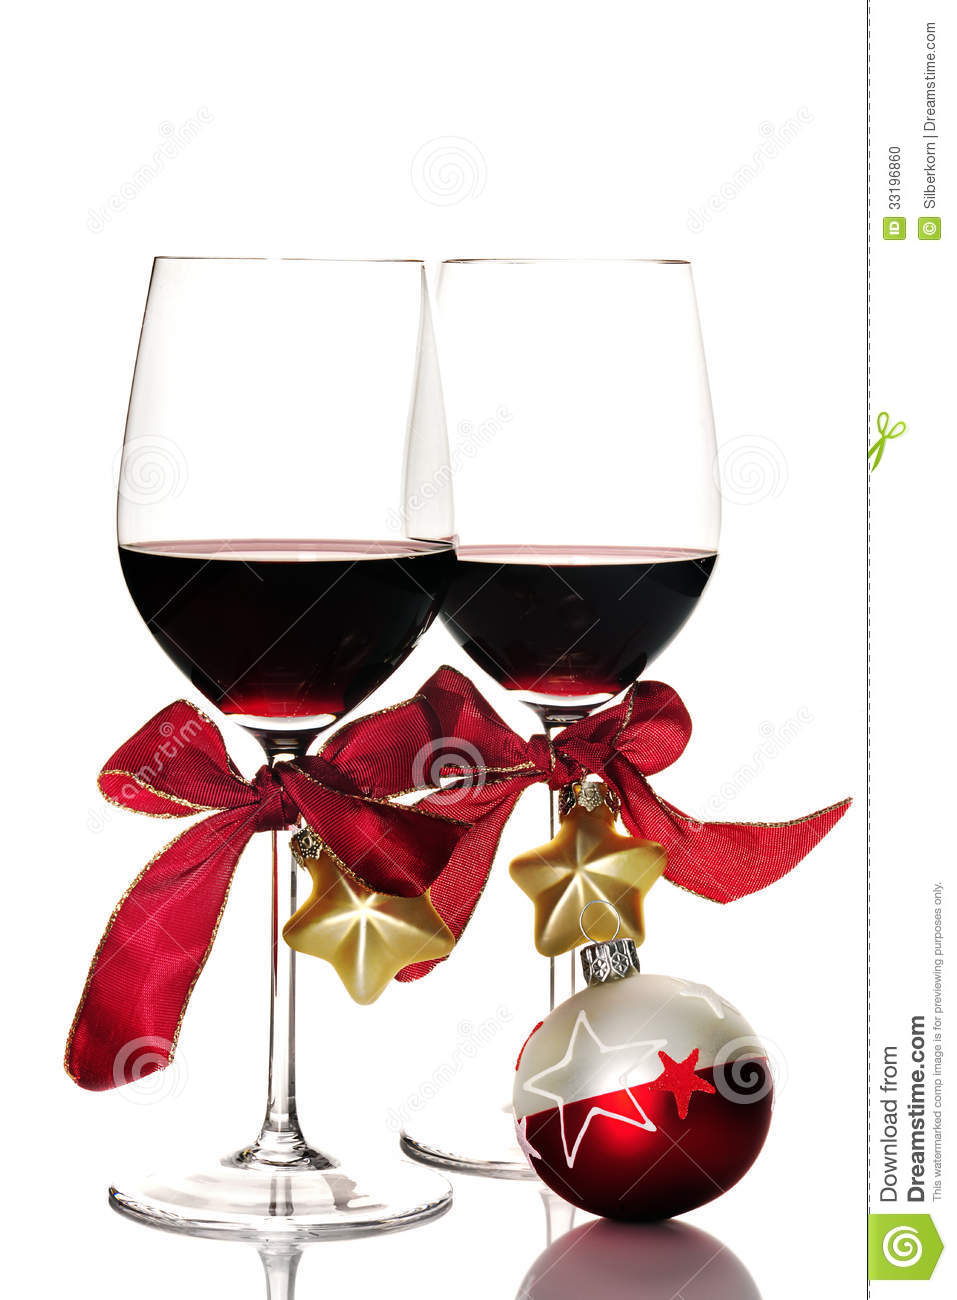 Two Glasses Of Red Wine And Christmas Ornaments Isolated On White